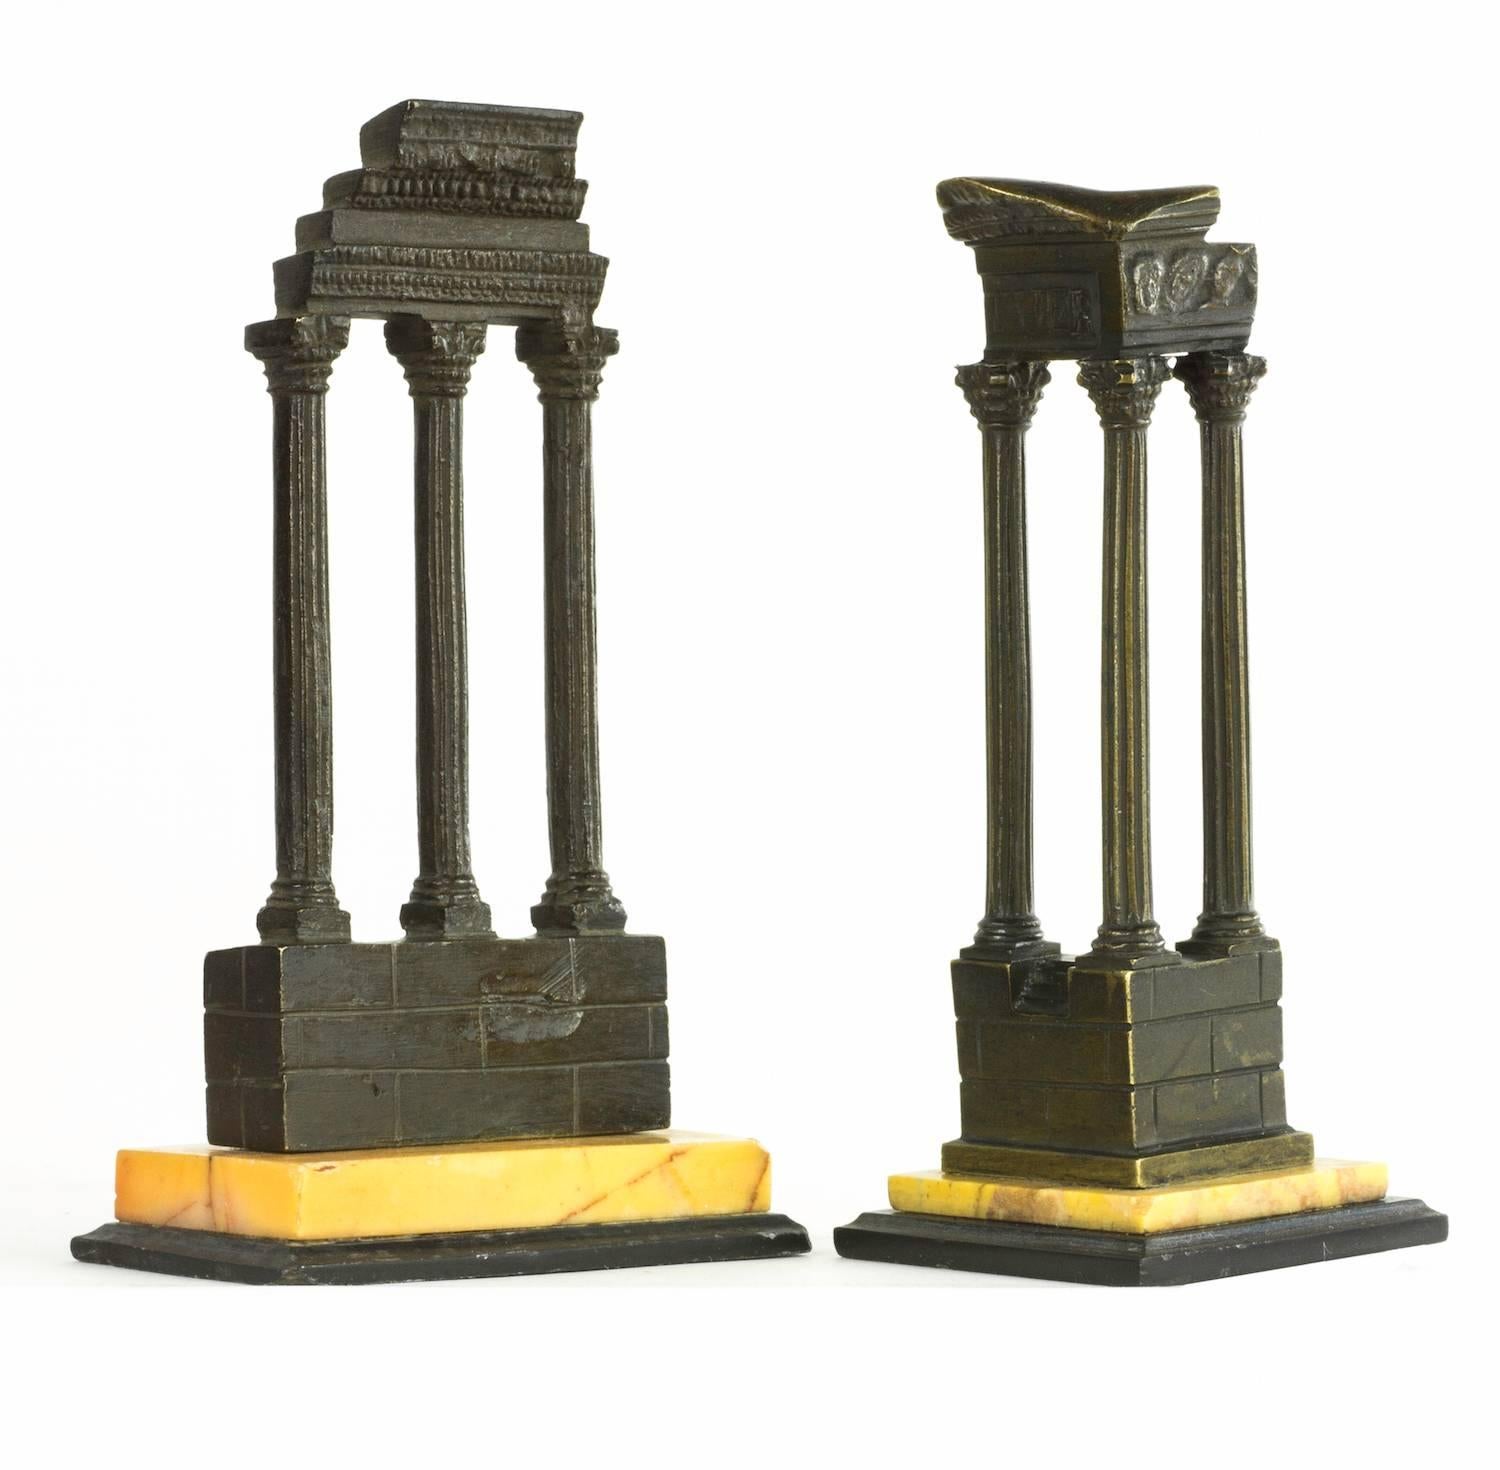 Carved Set of four Grand Tour architectural models of Roman ruins, c. 1880